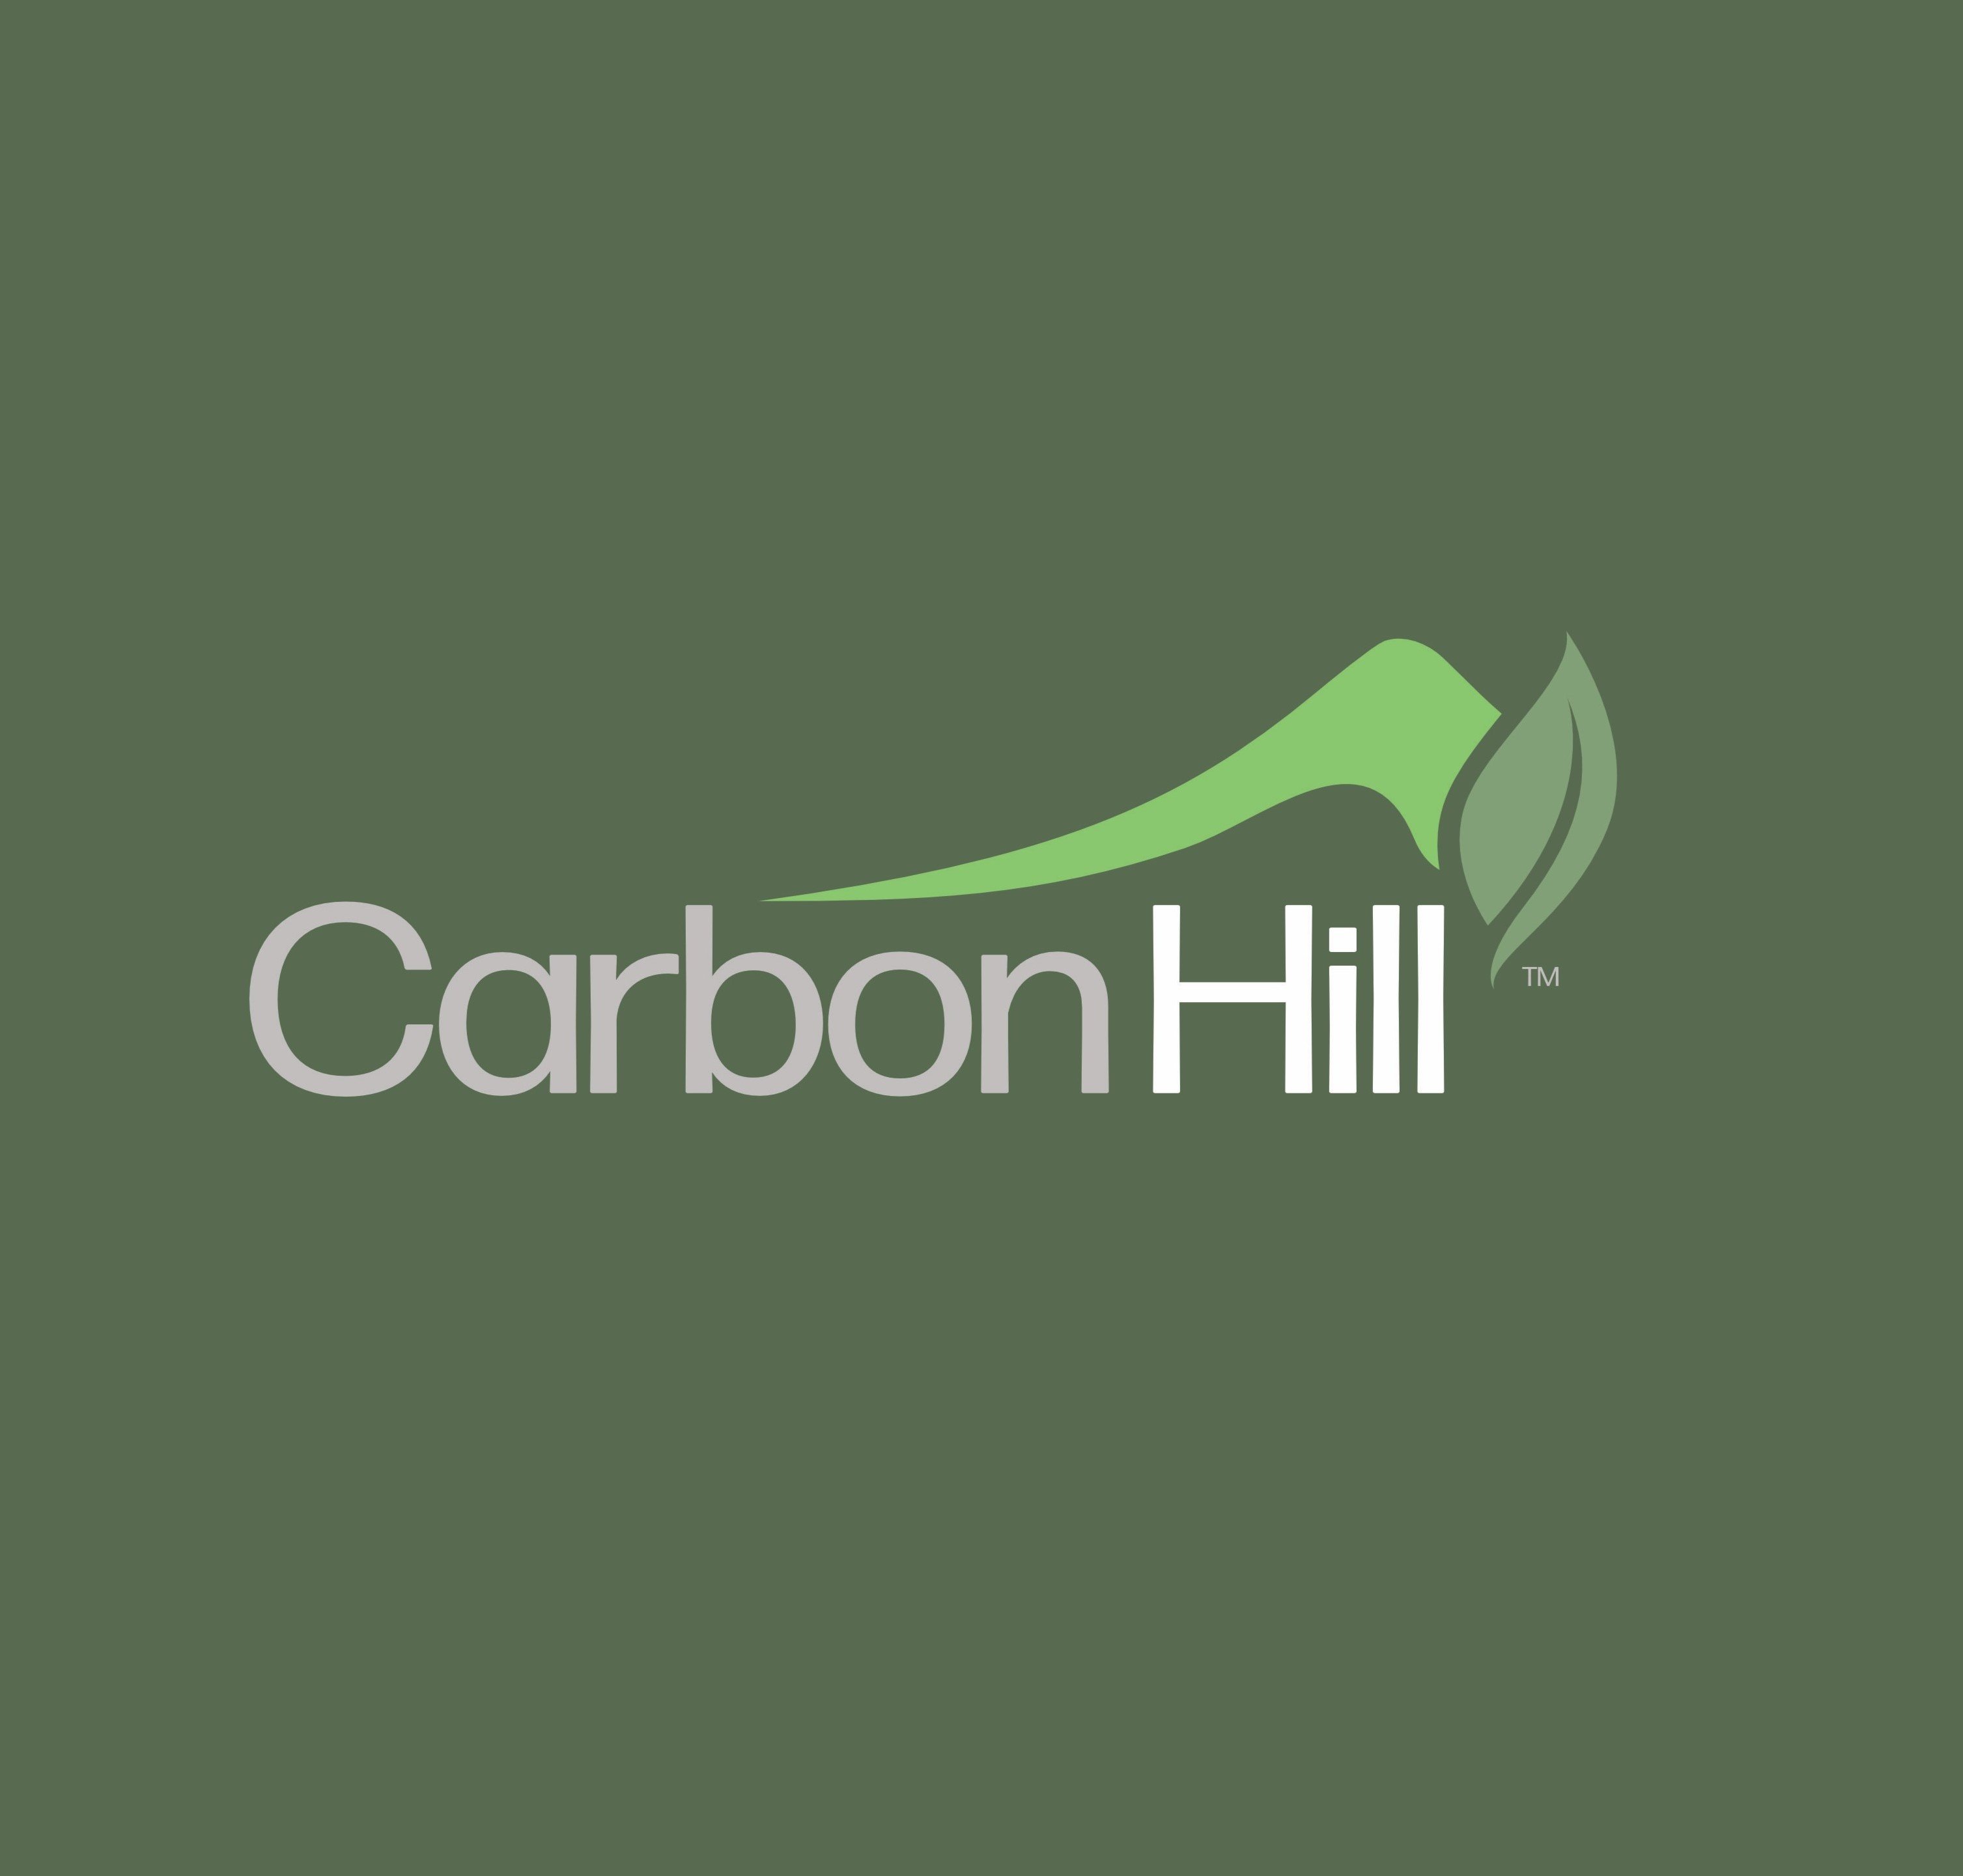 Carbon Hill Full Colour No Writing